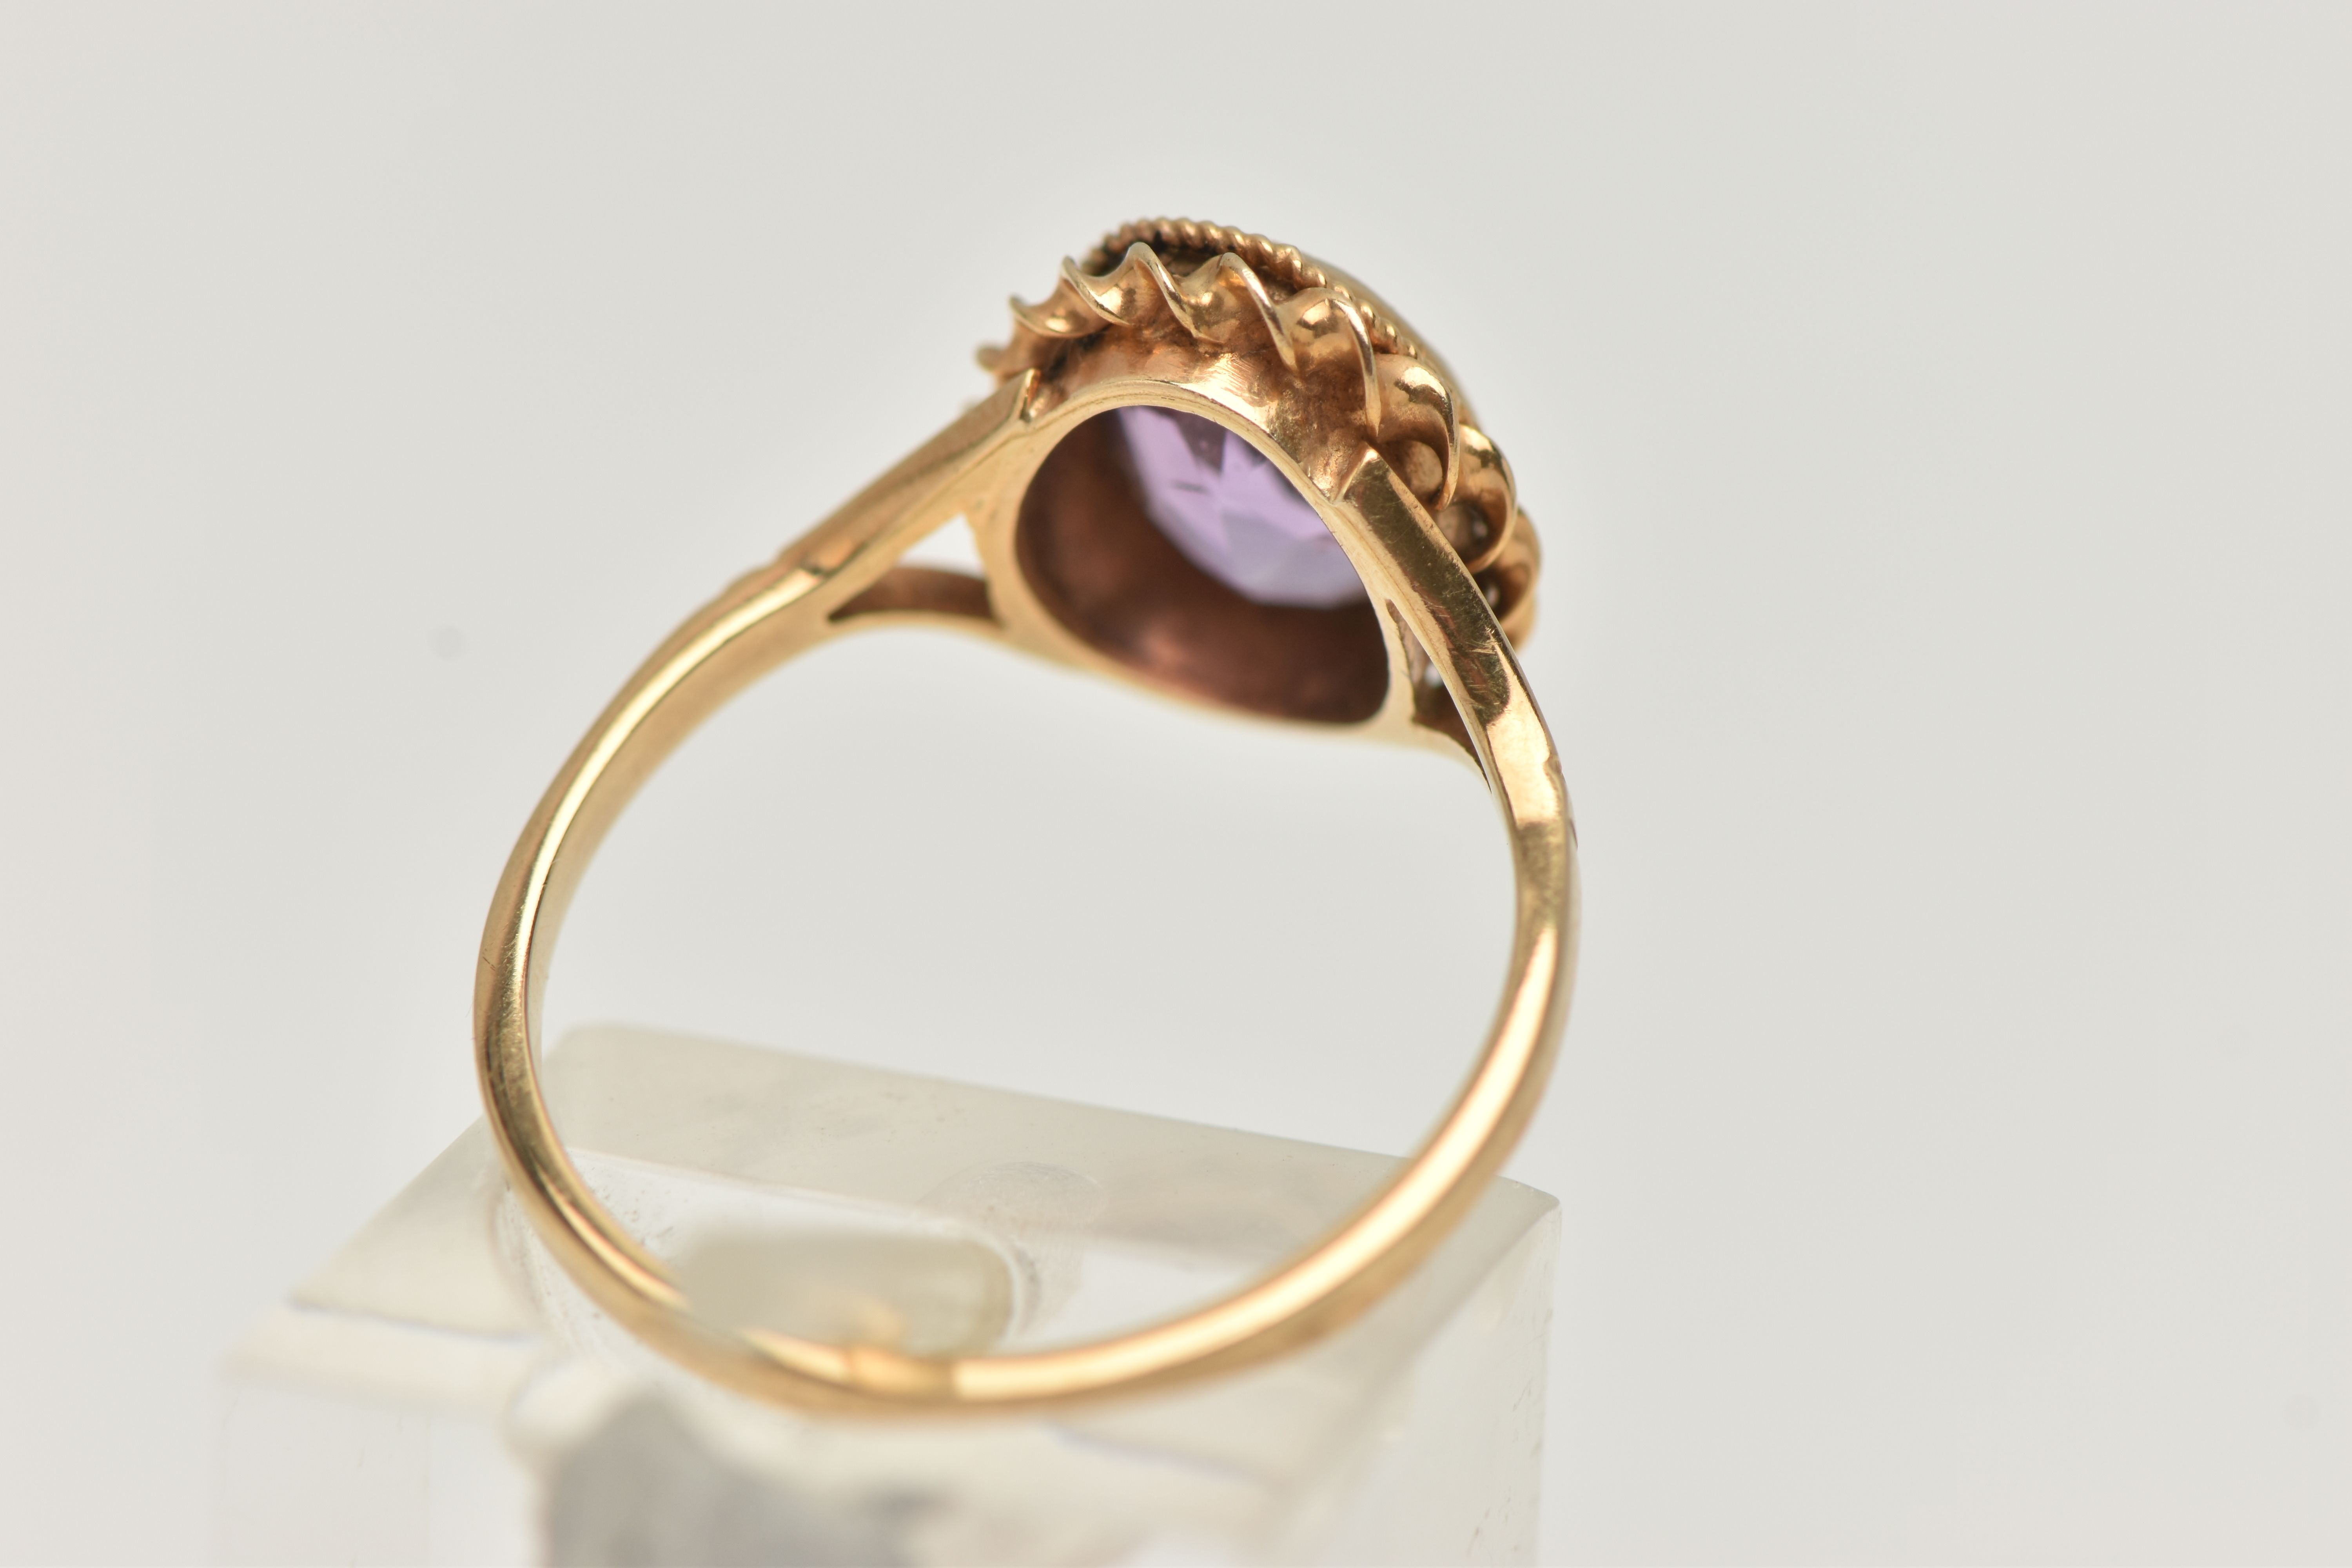 A 9CT GOLD AMETHYST RING, centering on an oval cut amethyst, collet set with a fine rope twist - Image 3 of 4